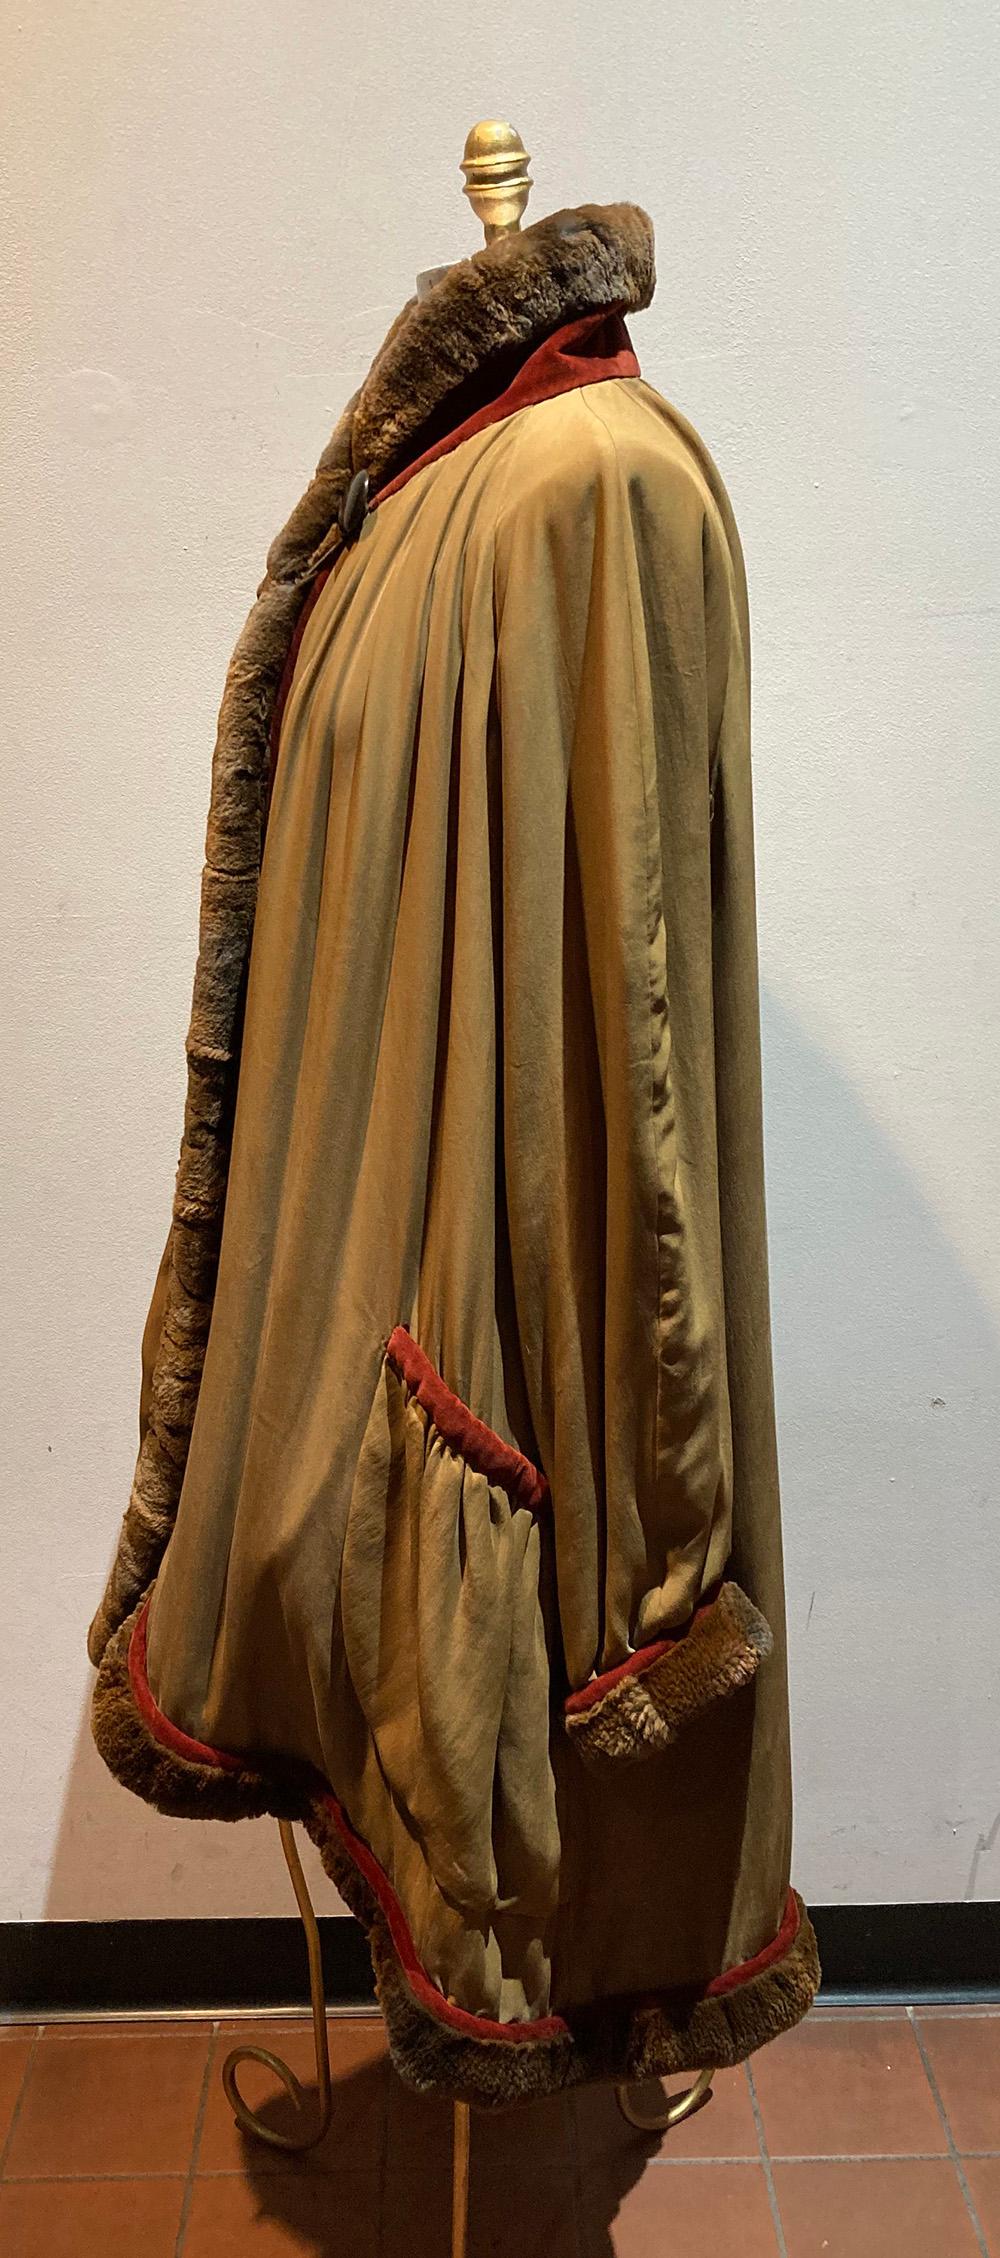 Vintage Fendi Silk Fur Coat in excellent condition. Soft Tan silk trimmed with brown rabbit fur collar and deep red velvet. Single top collar button closure opens to matching tan sateen lining. Absolyrely gorgeous drape to this piece. Raglan style